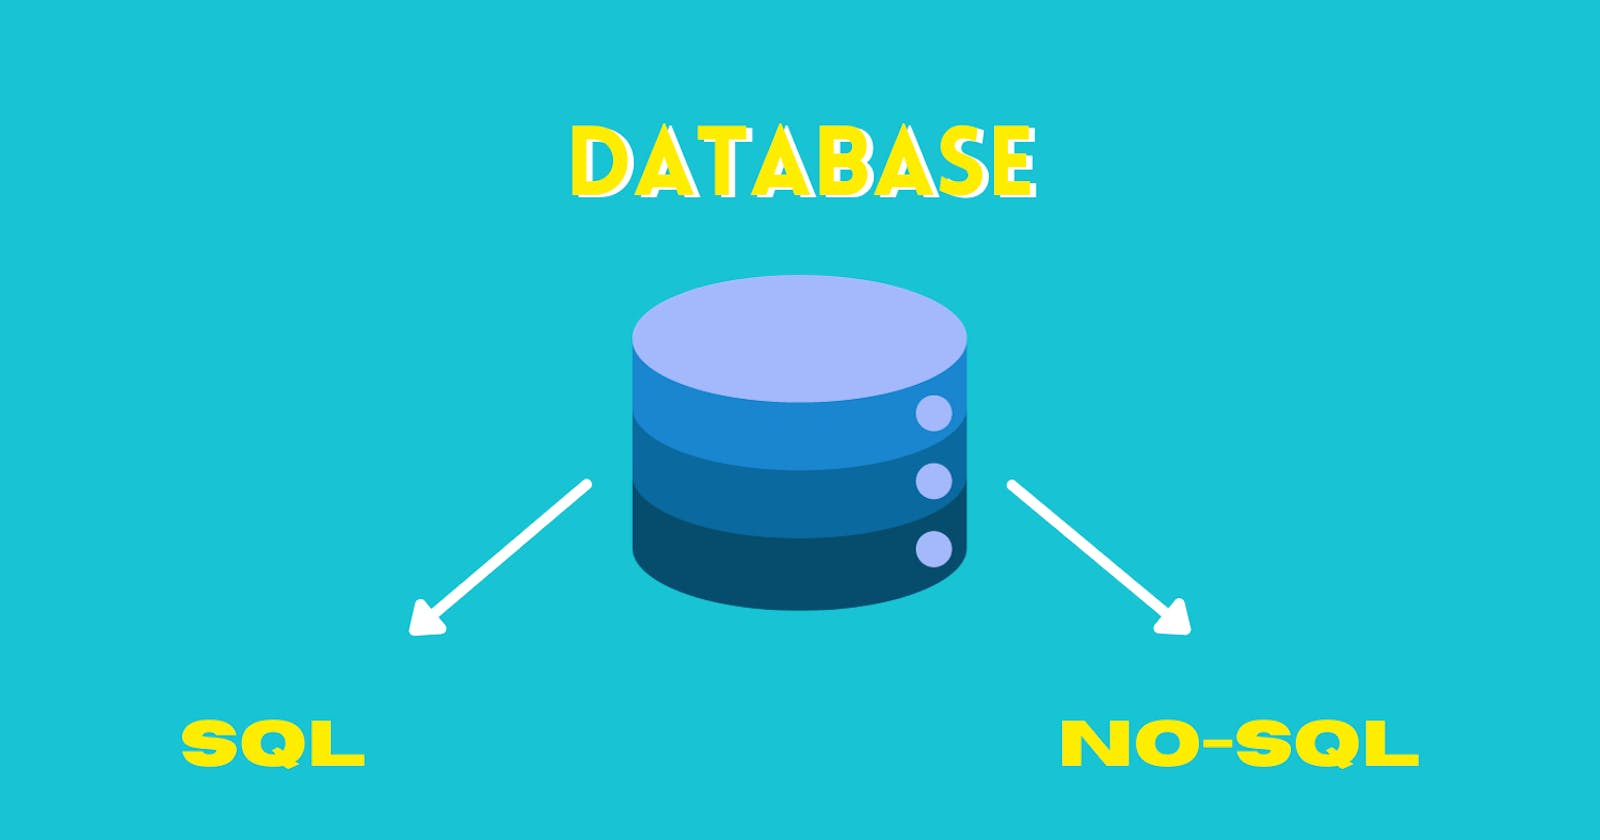 DATABASE : Store your Web-app data here